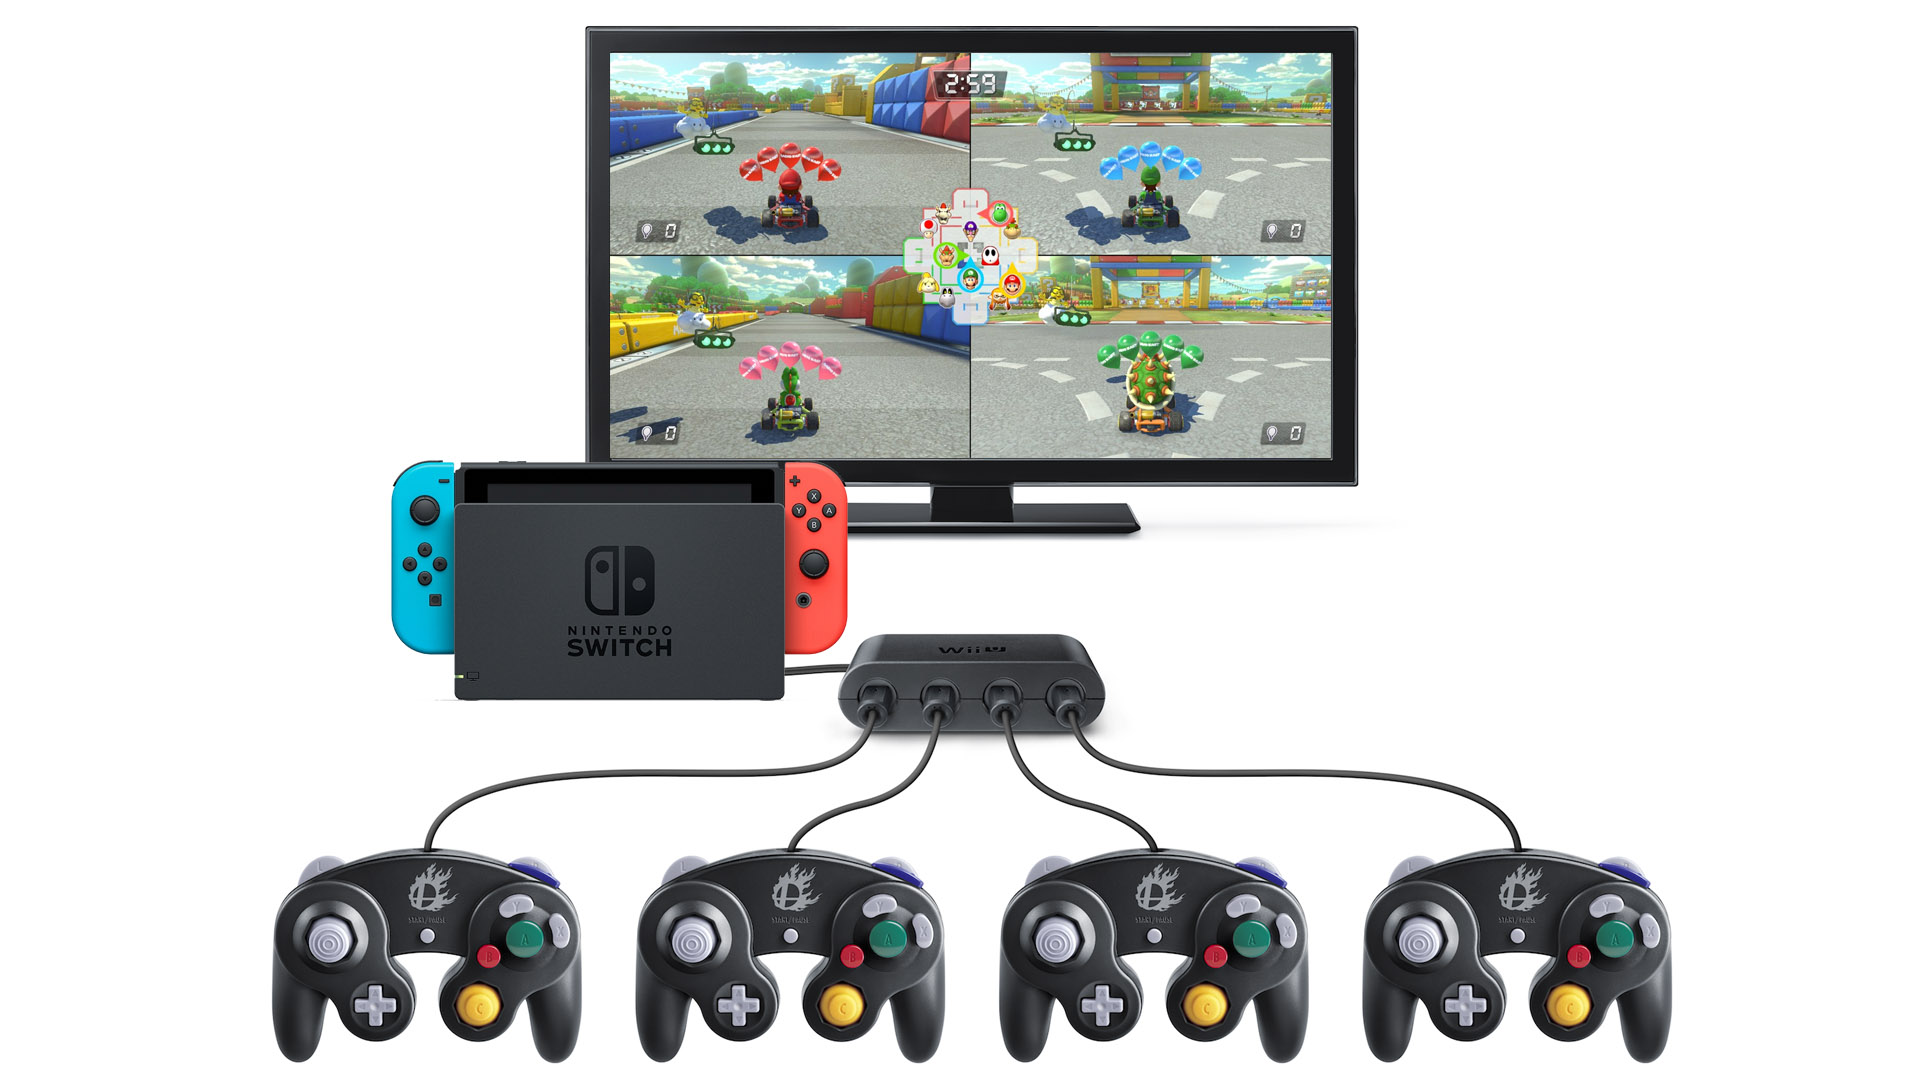 gamecube games on the switch